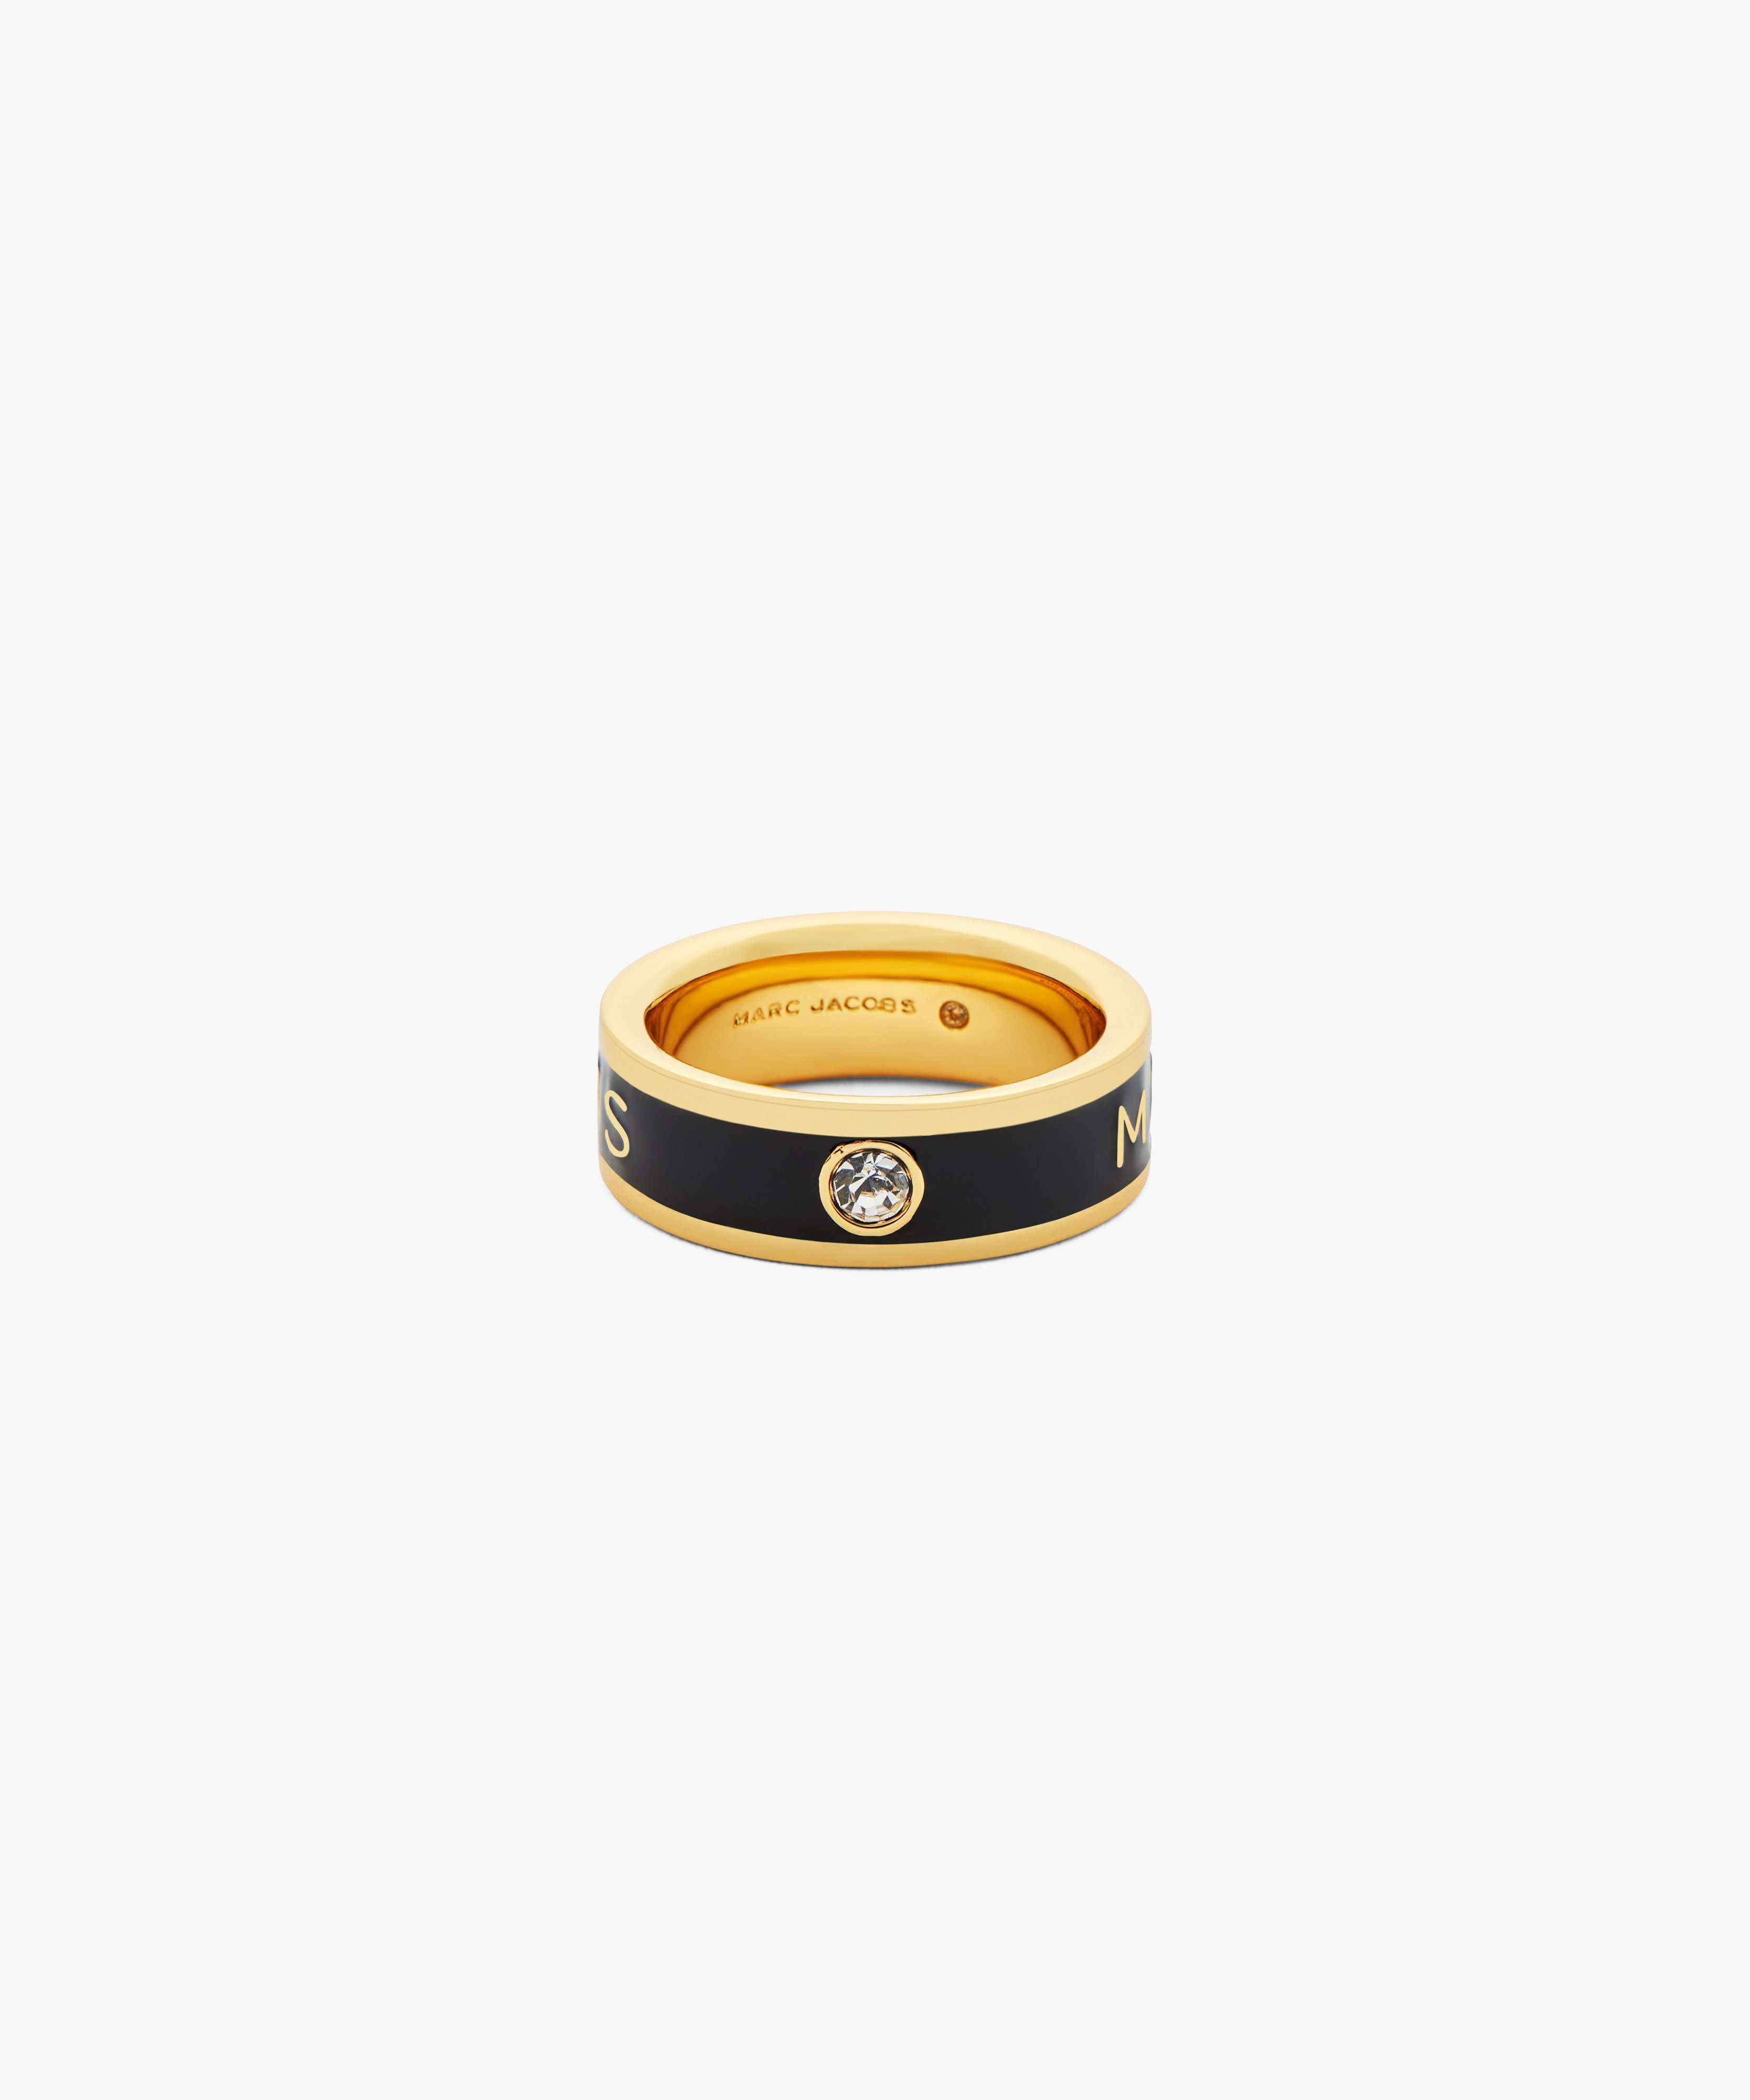 The Marc Jacobs Enamel Ring in Gold/Black